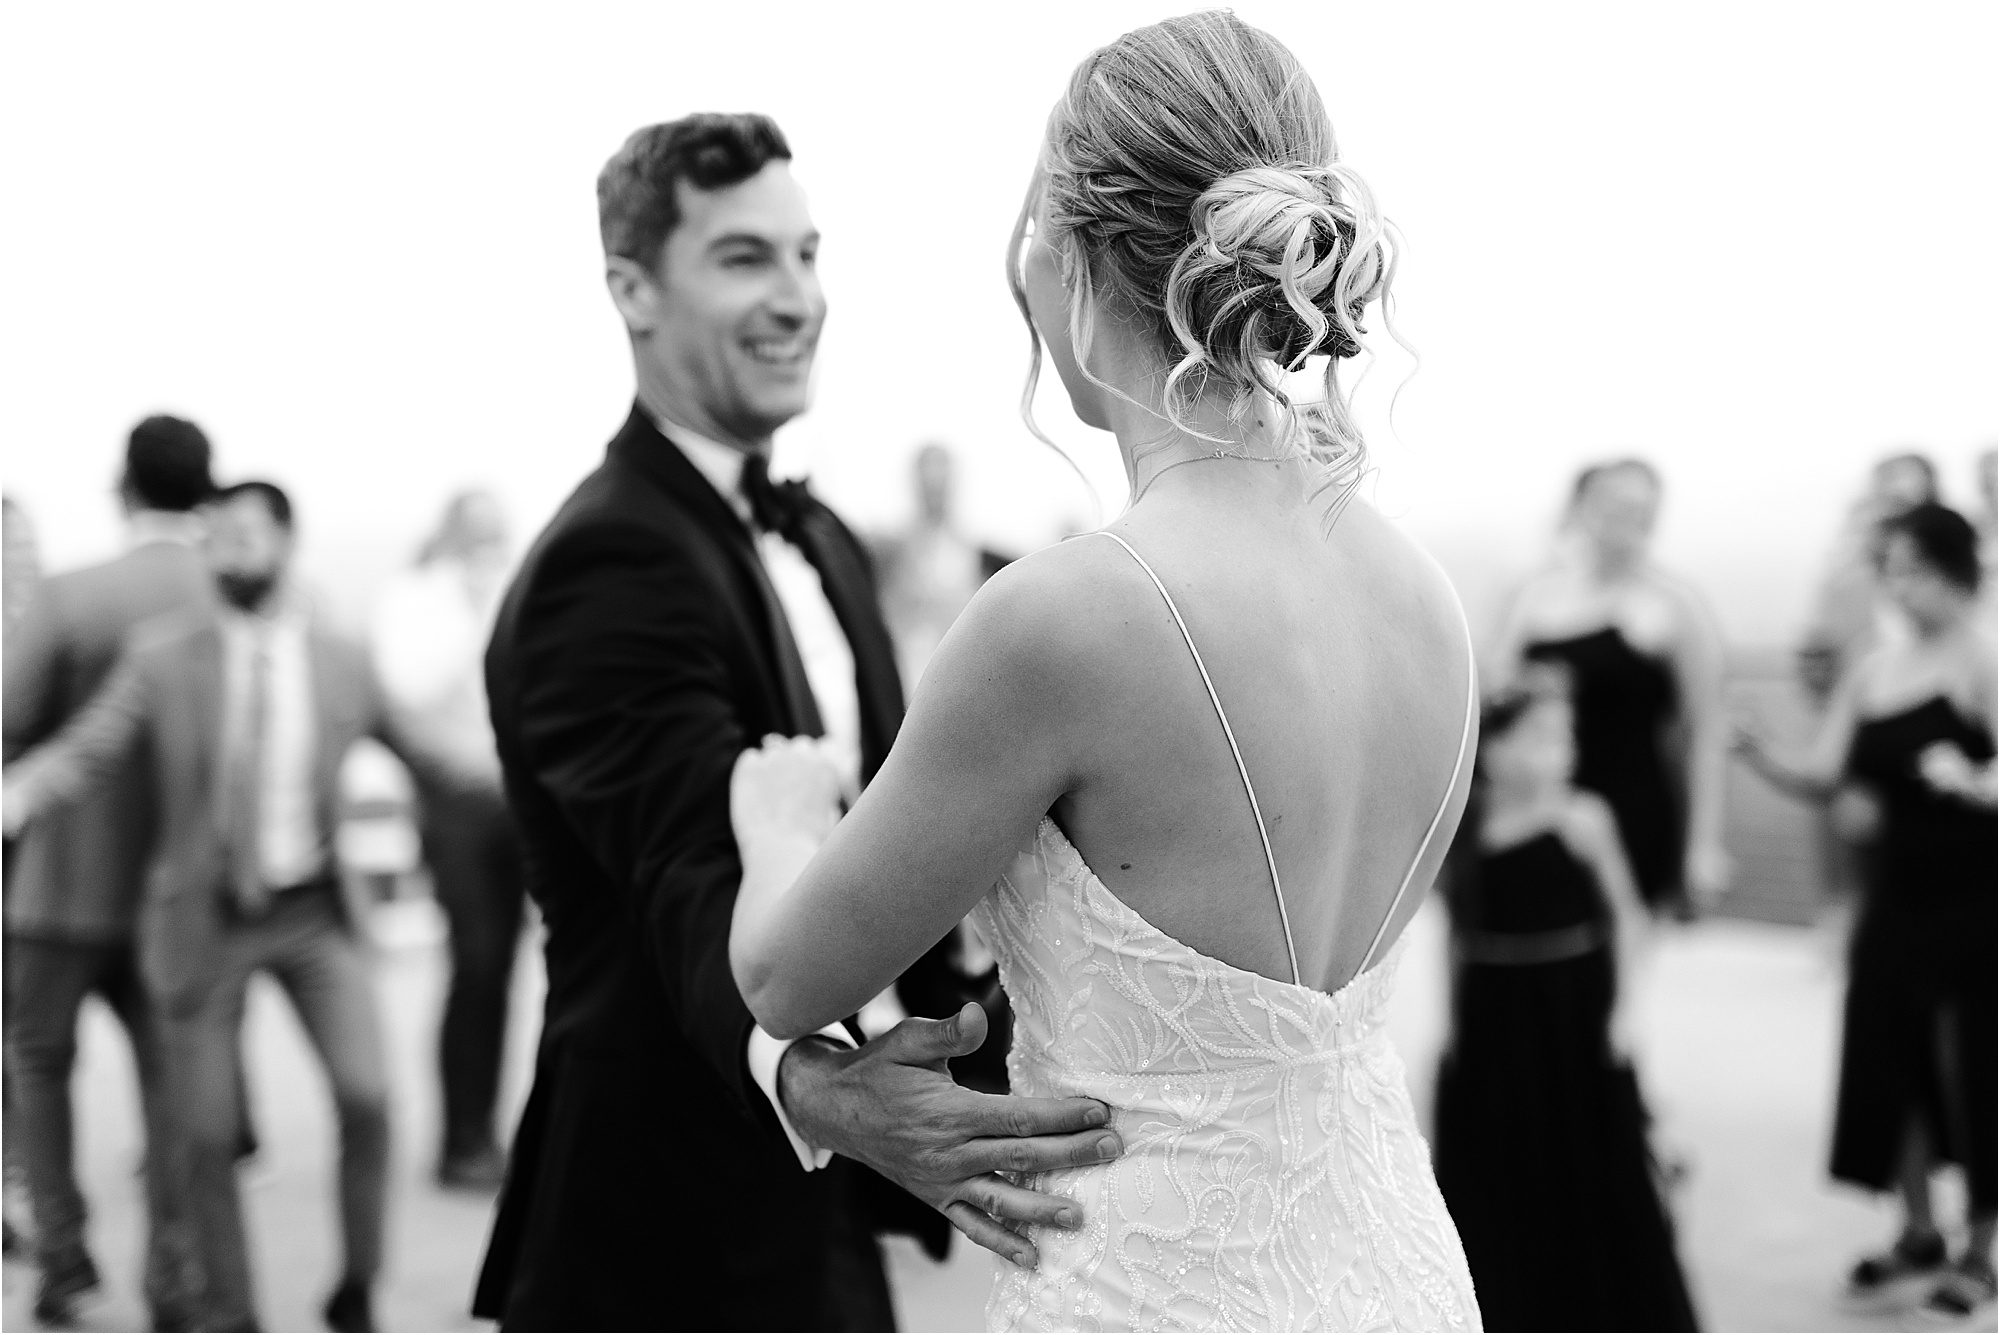 black and white dancing photo of bride and groom